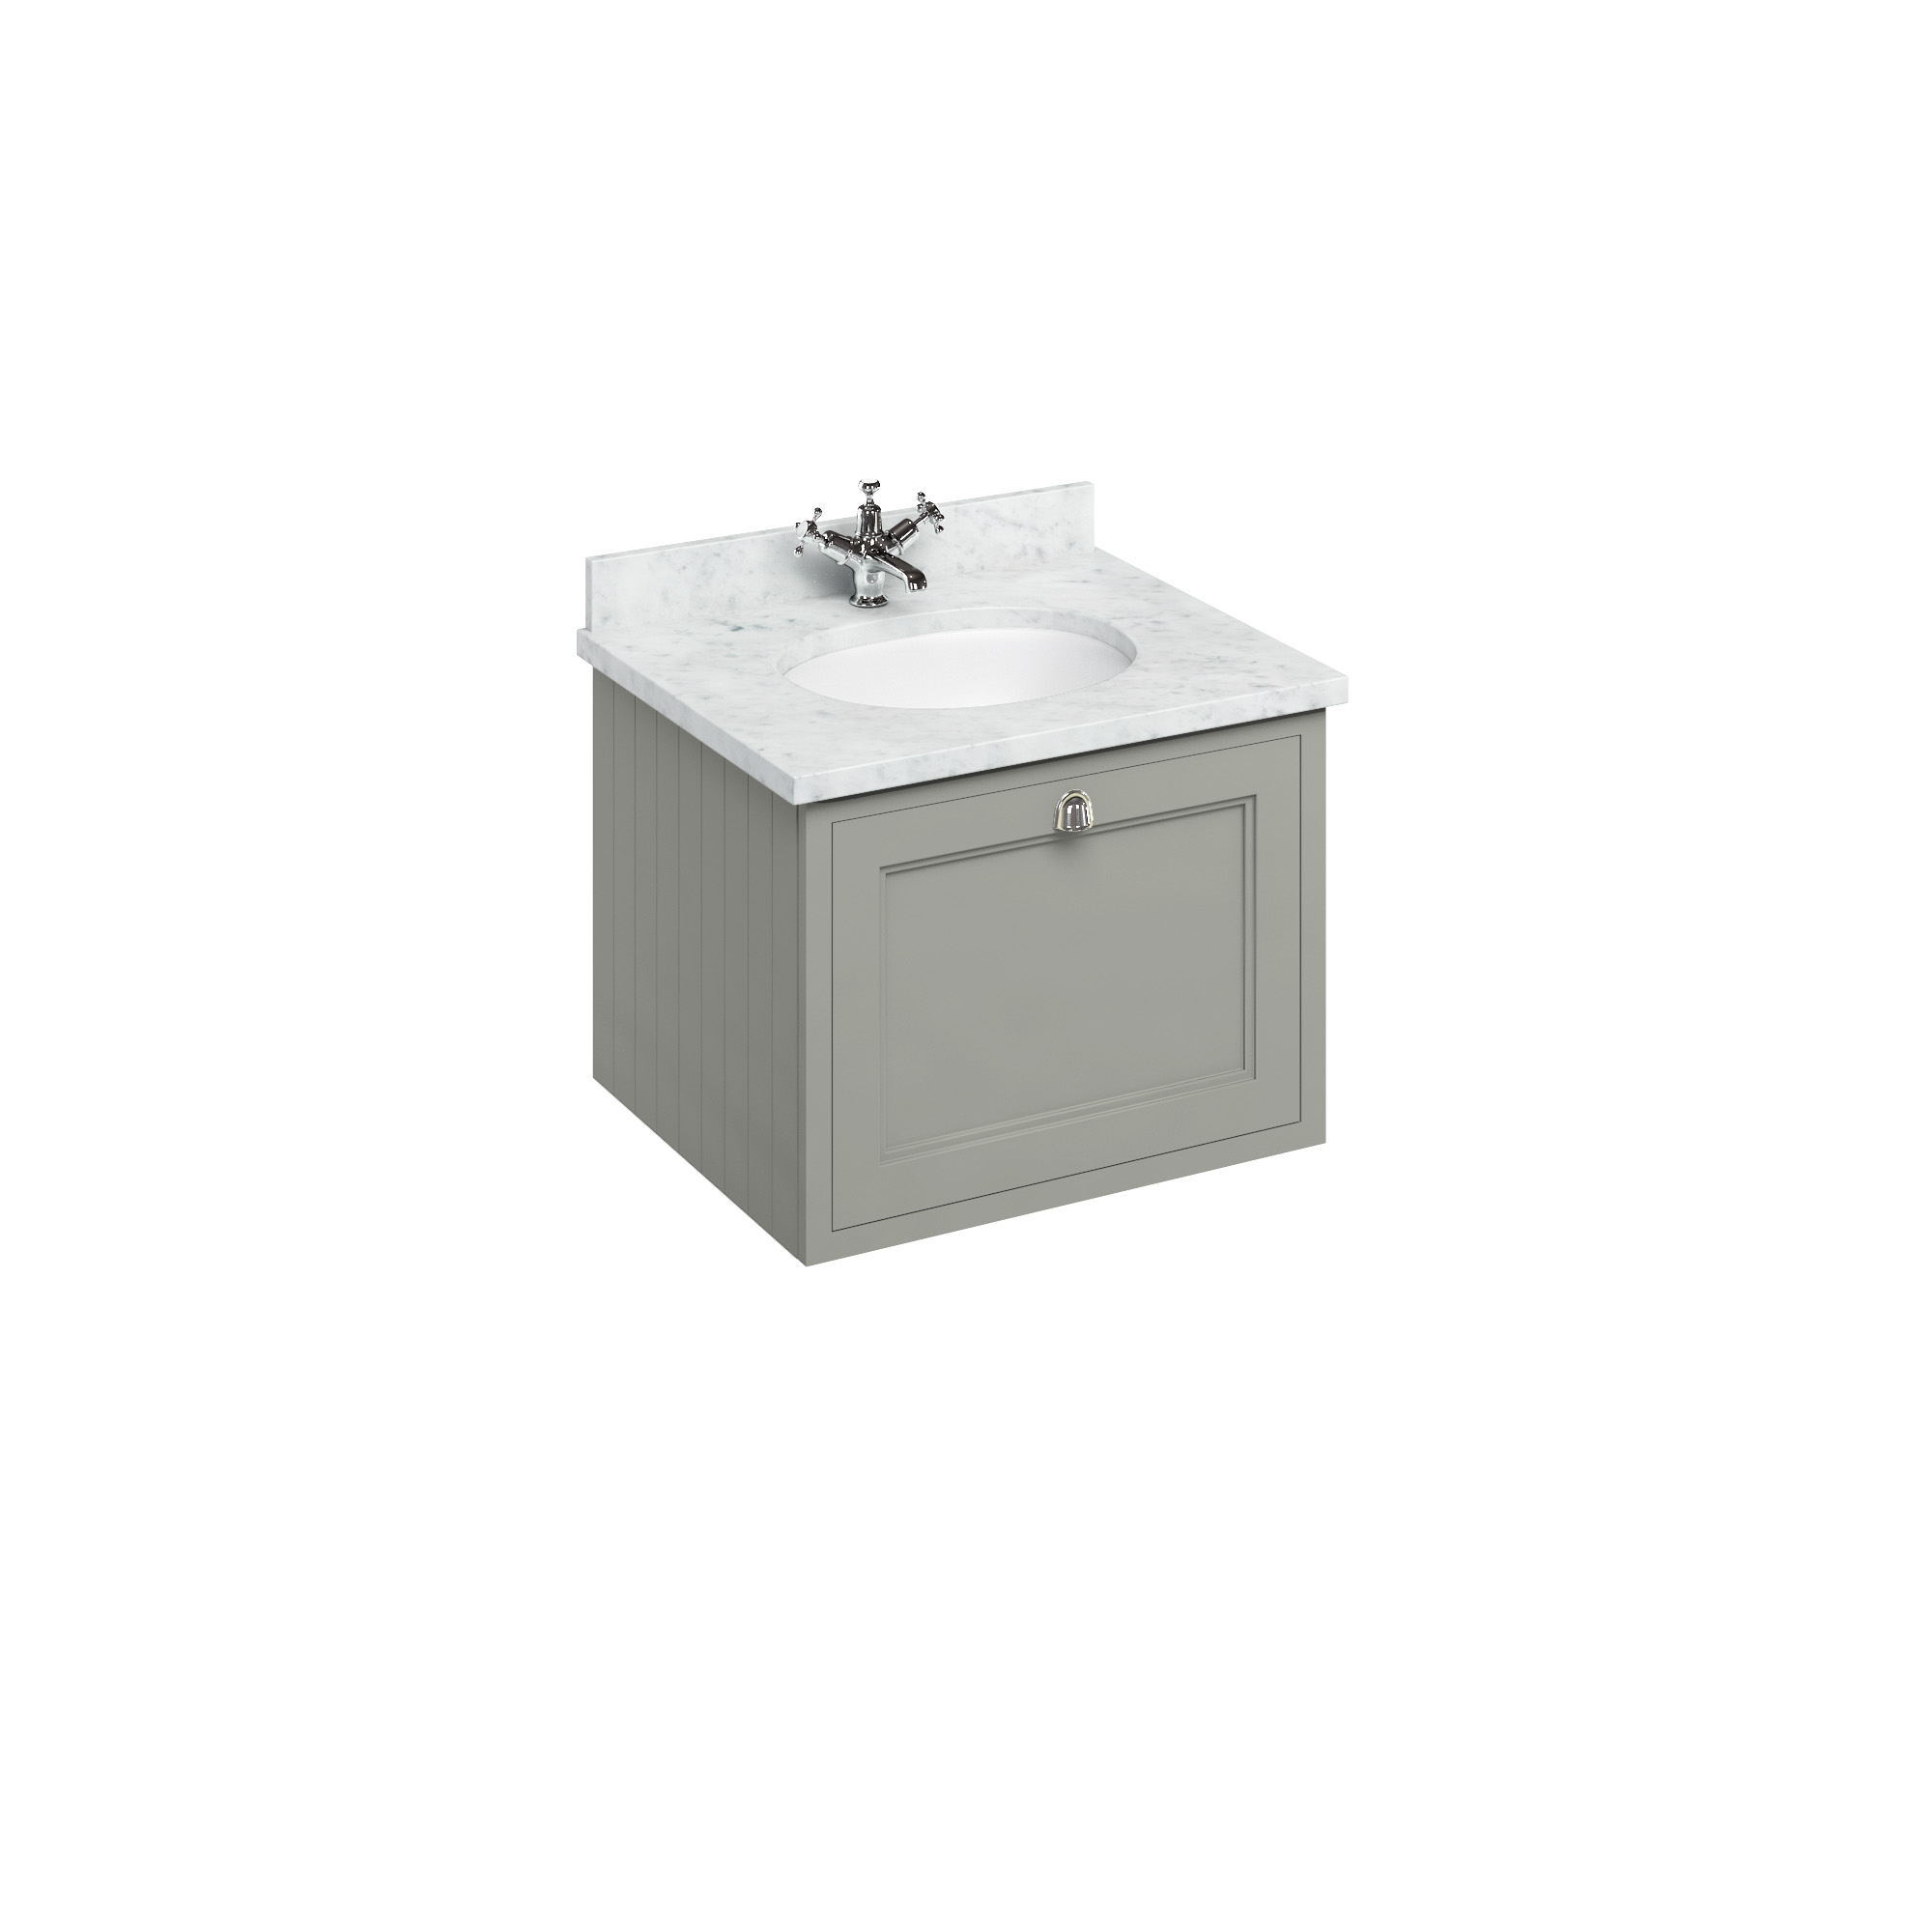 65 Wall Hung Vanity Unit with drawers